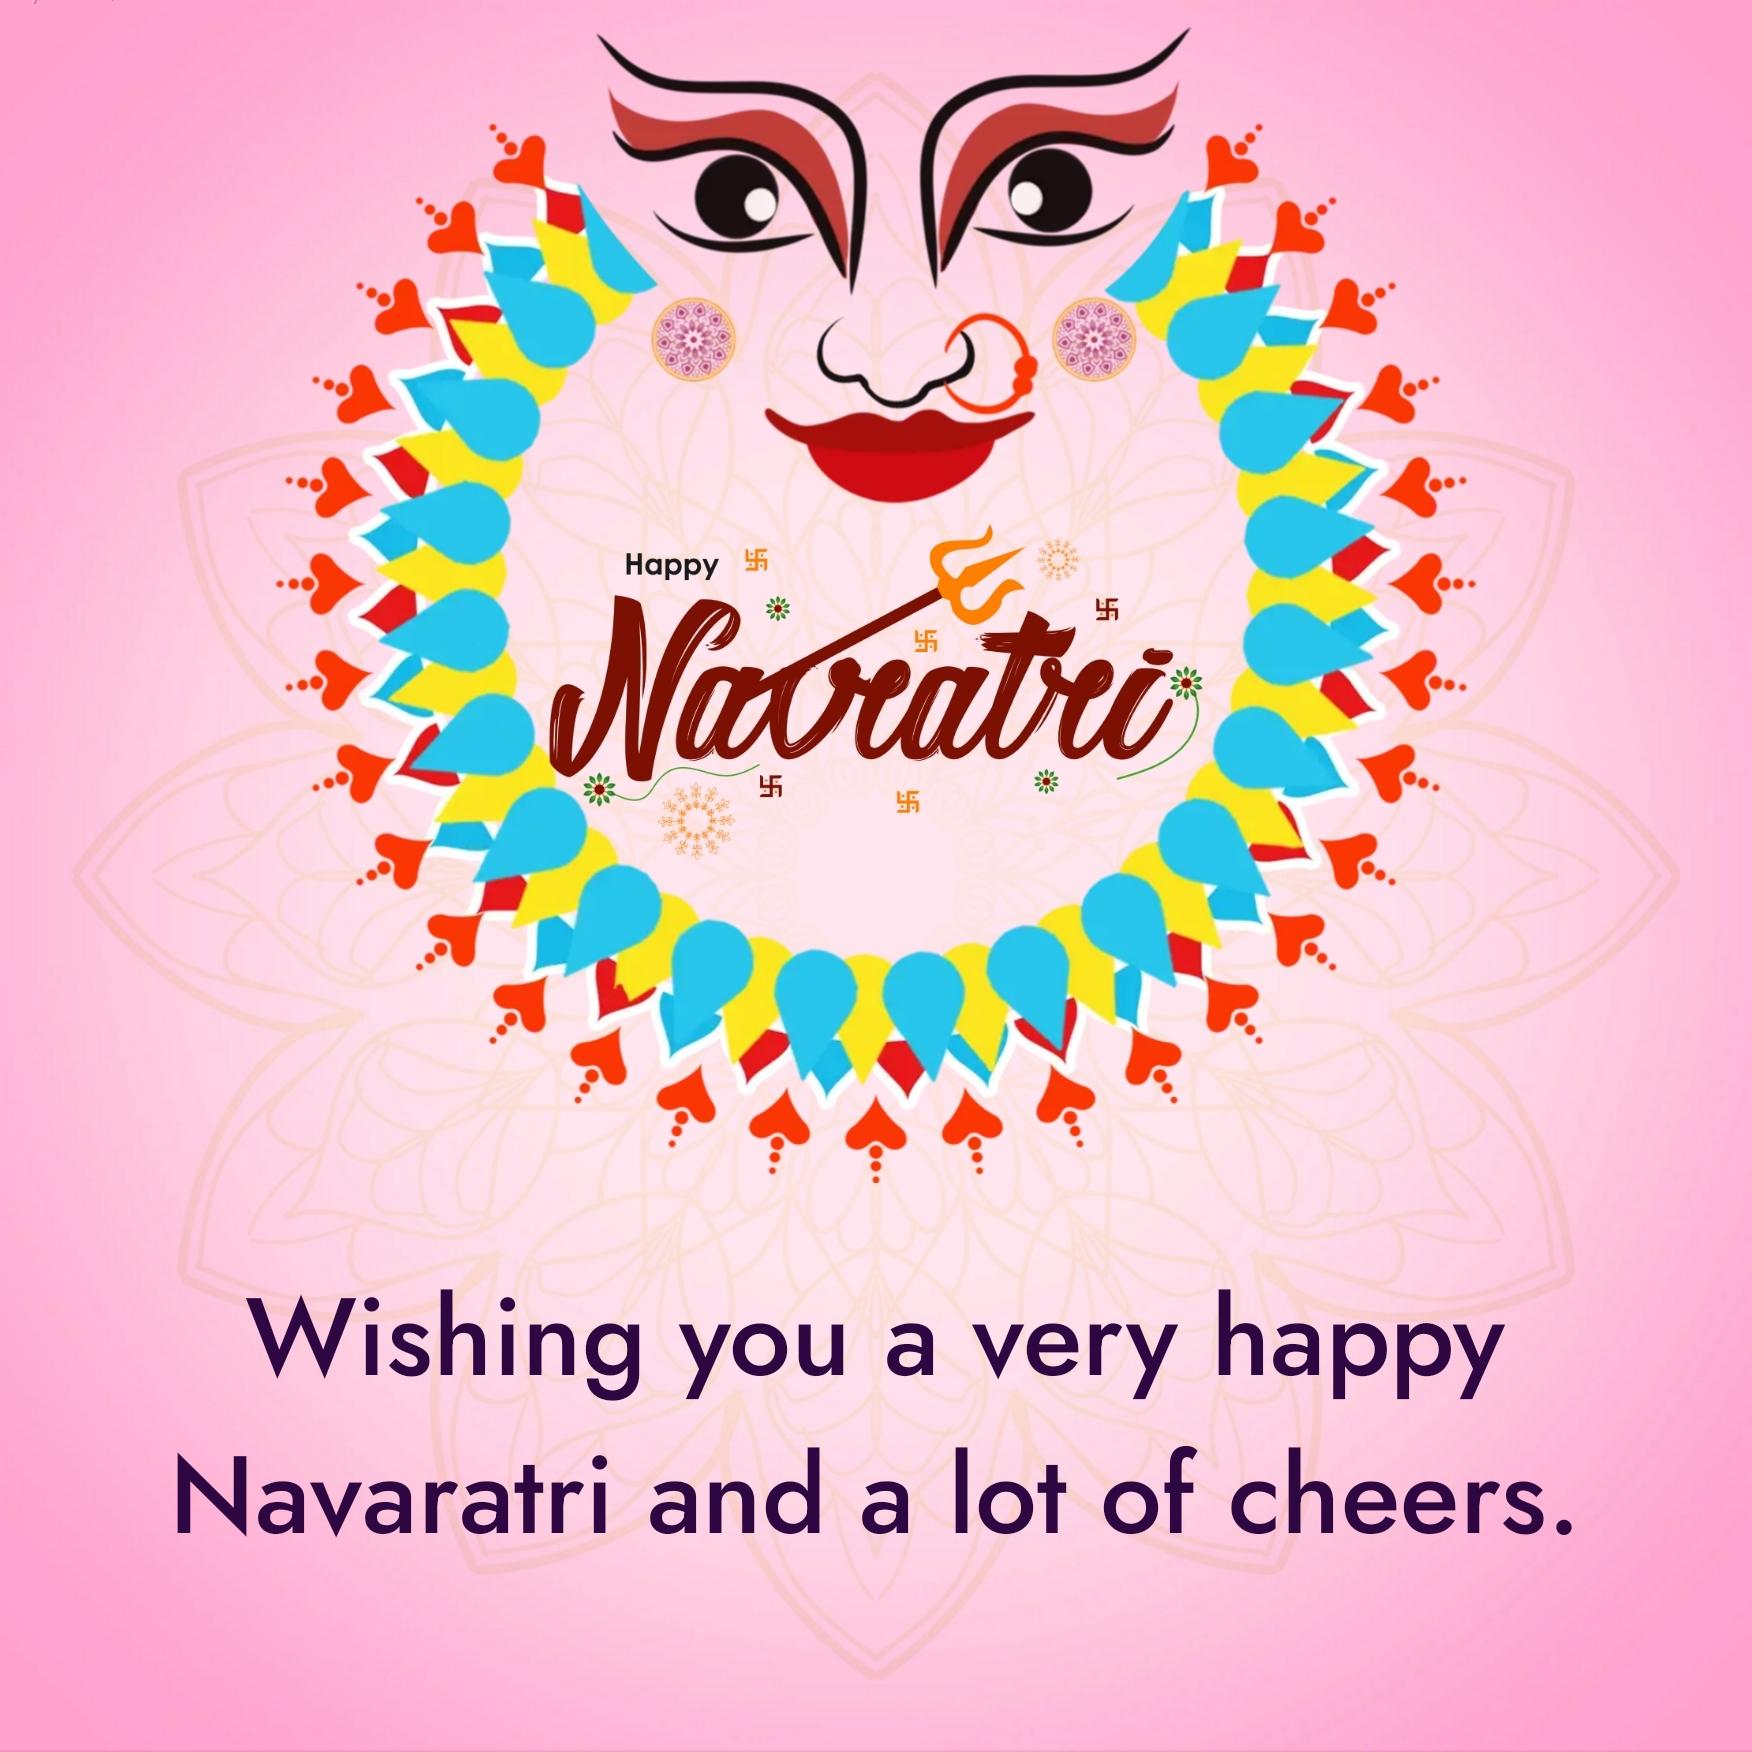 Wishing you a very happy Navaratri and a lot of cheers